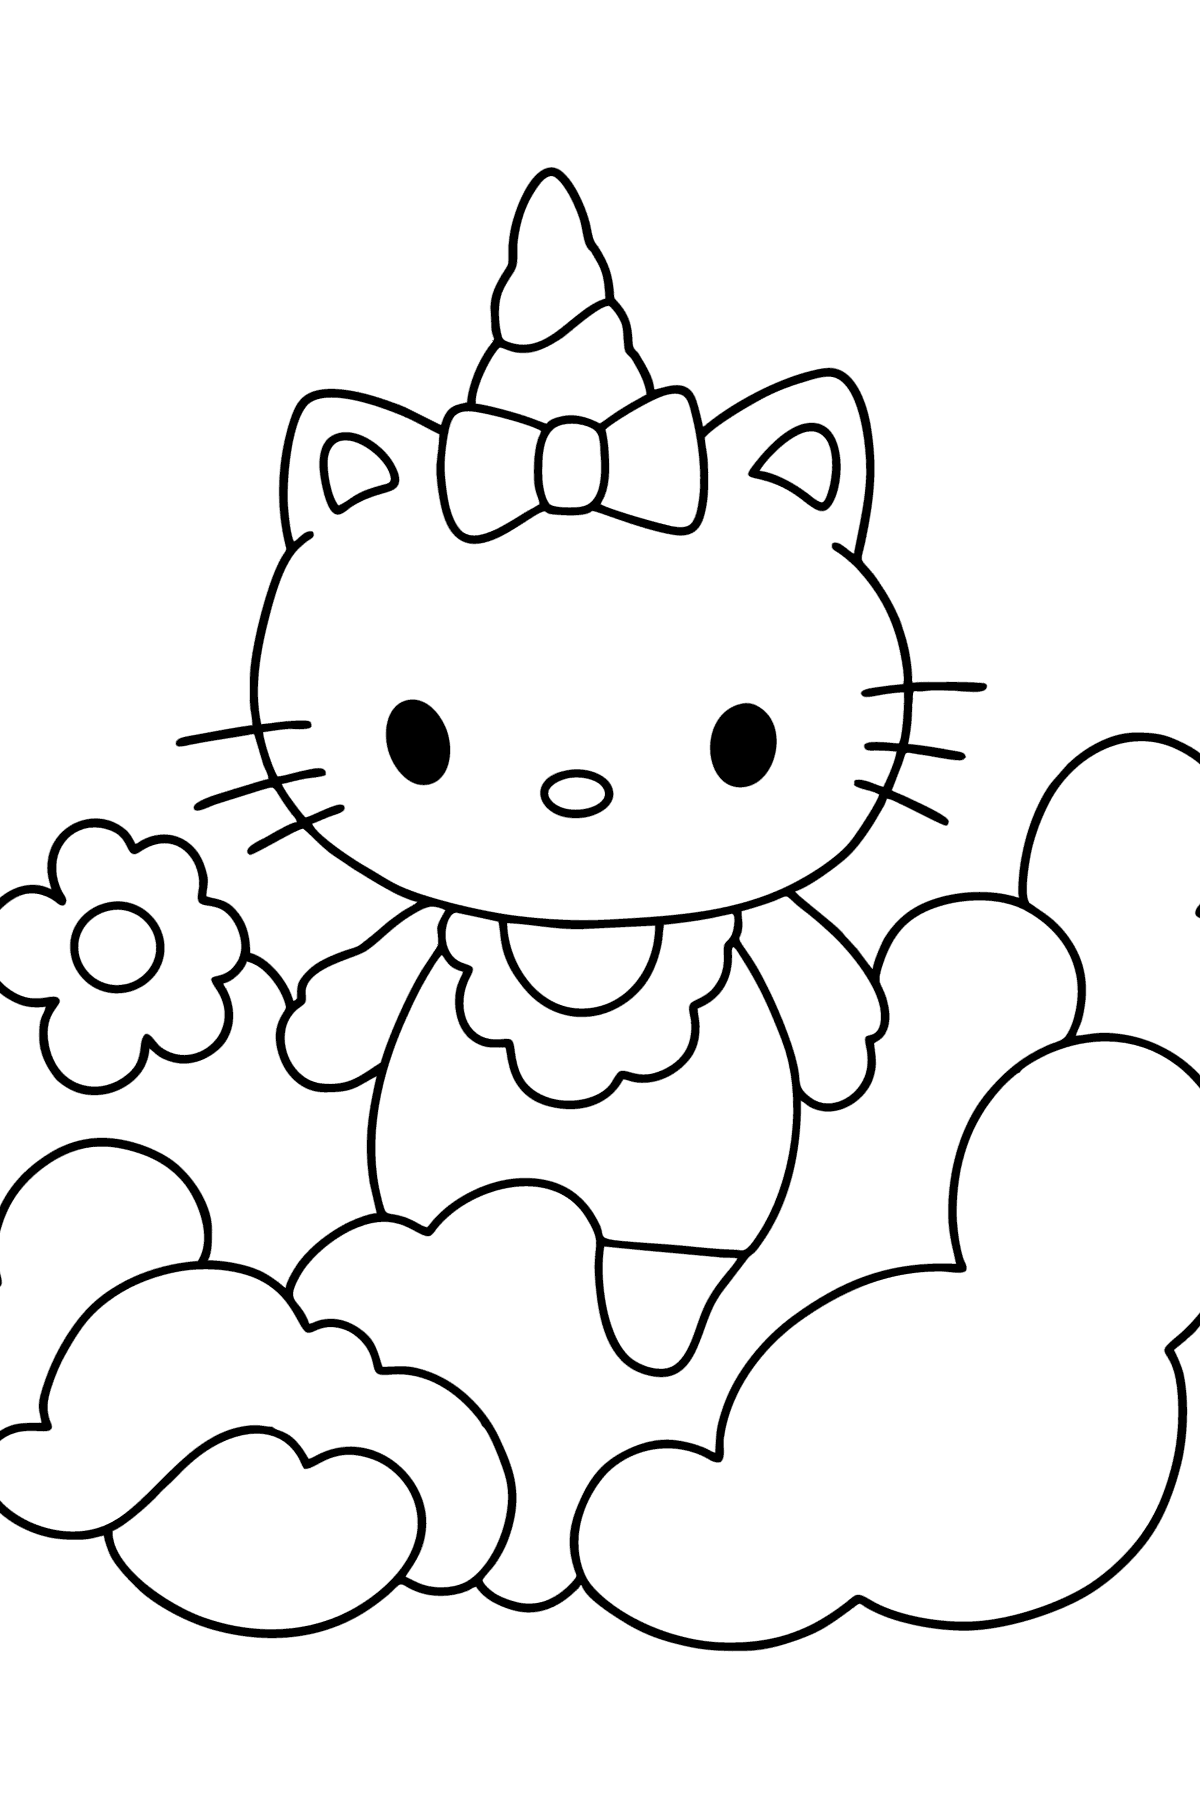 Hello Kitty Unicorn coloring page - Coloring Pages for Kids